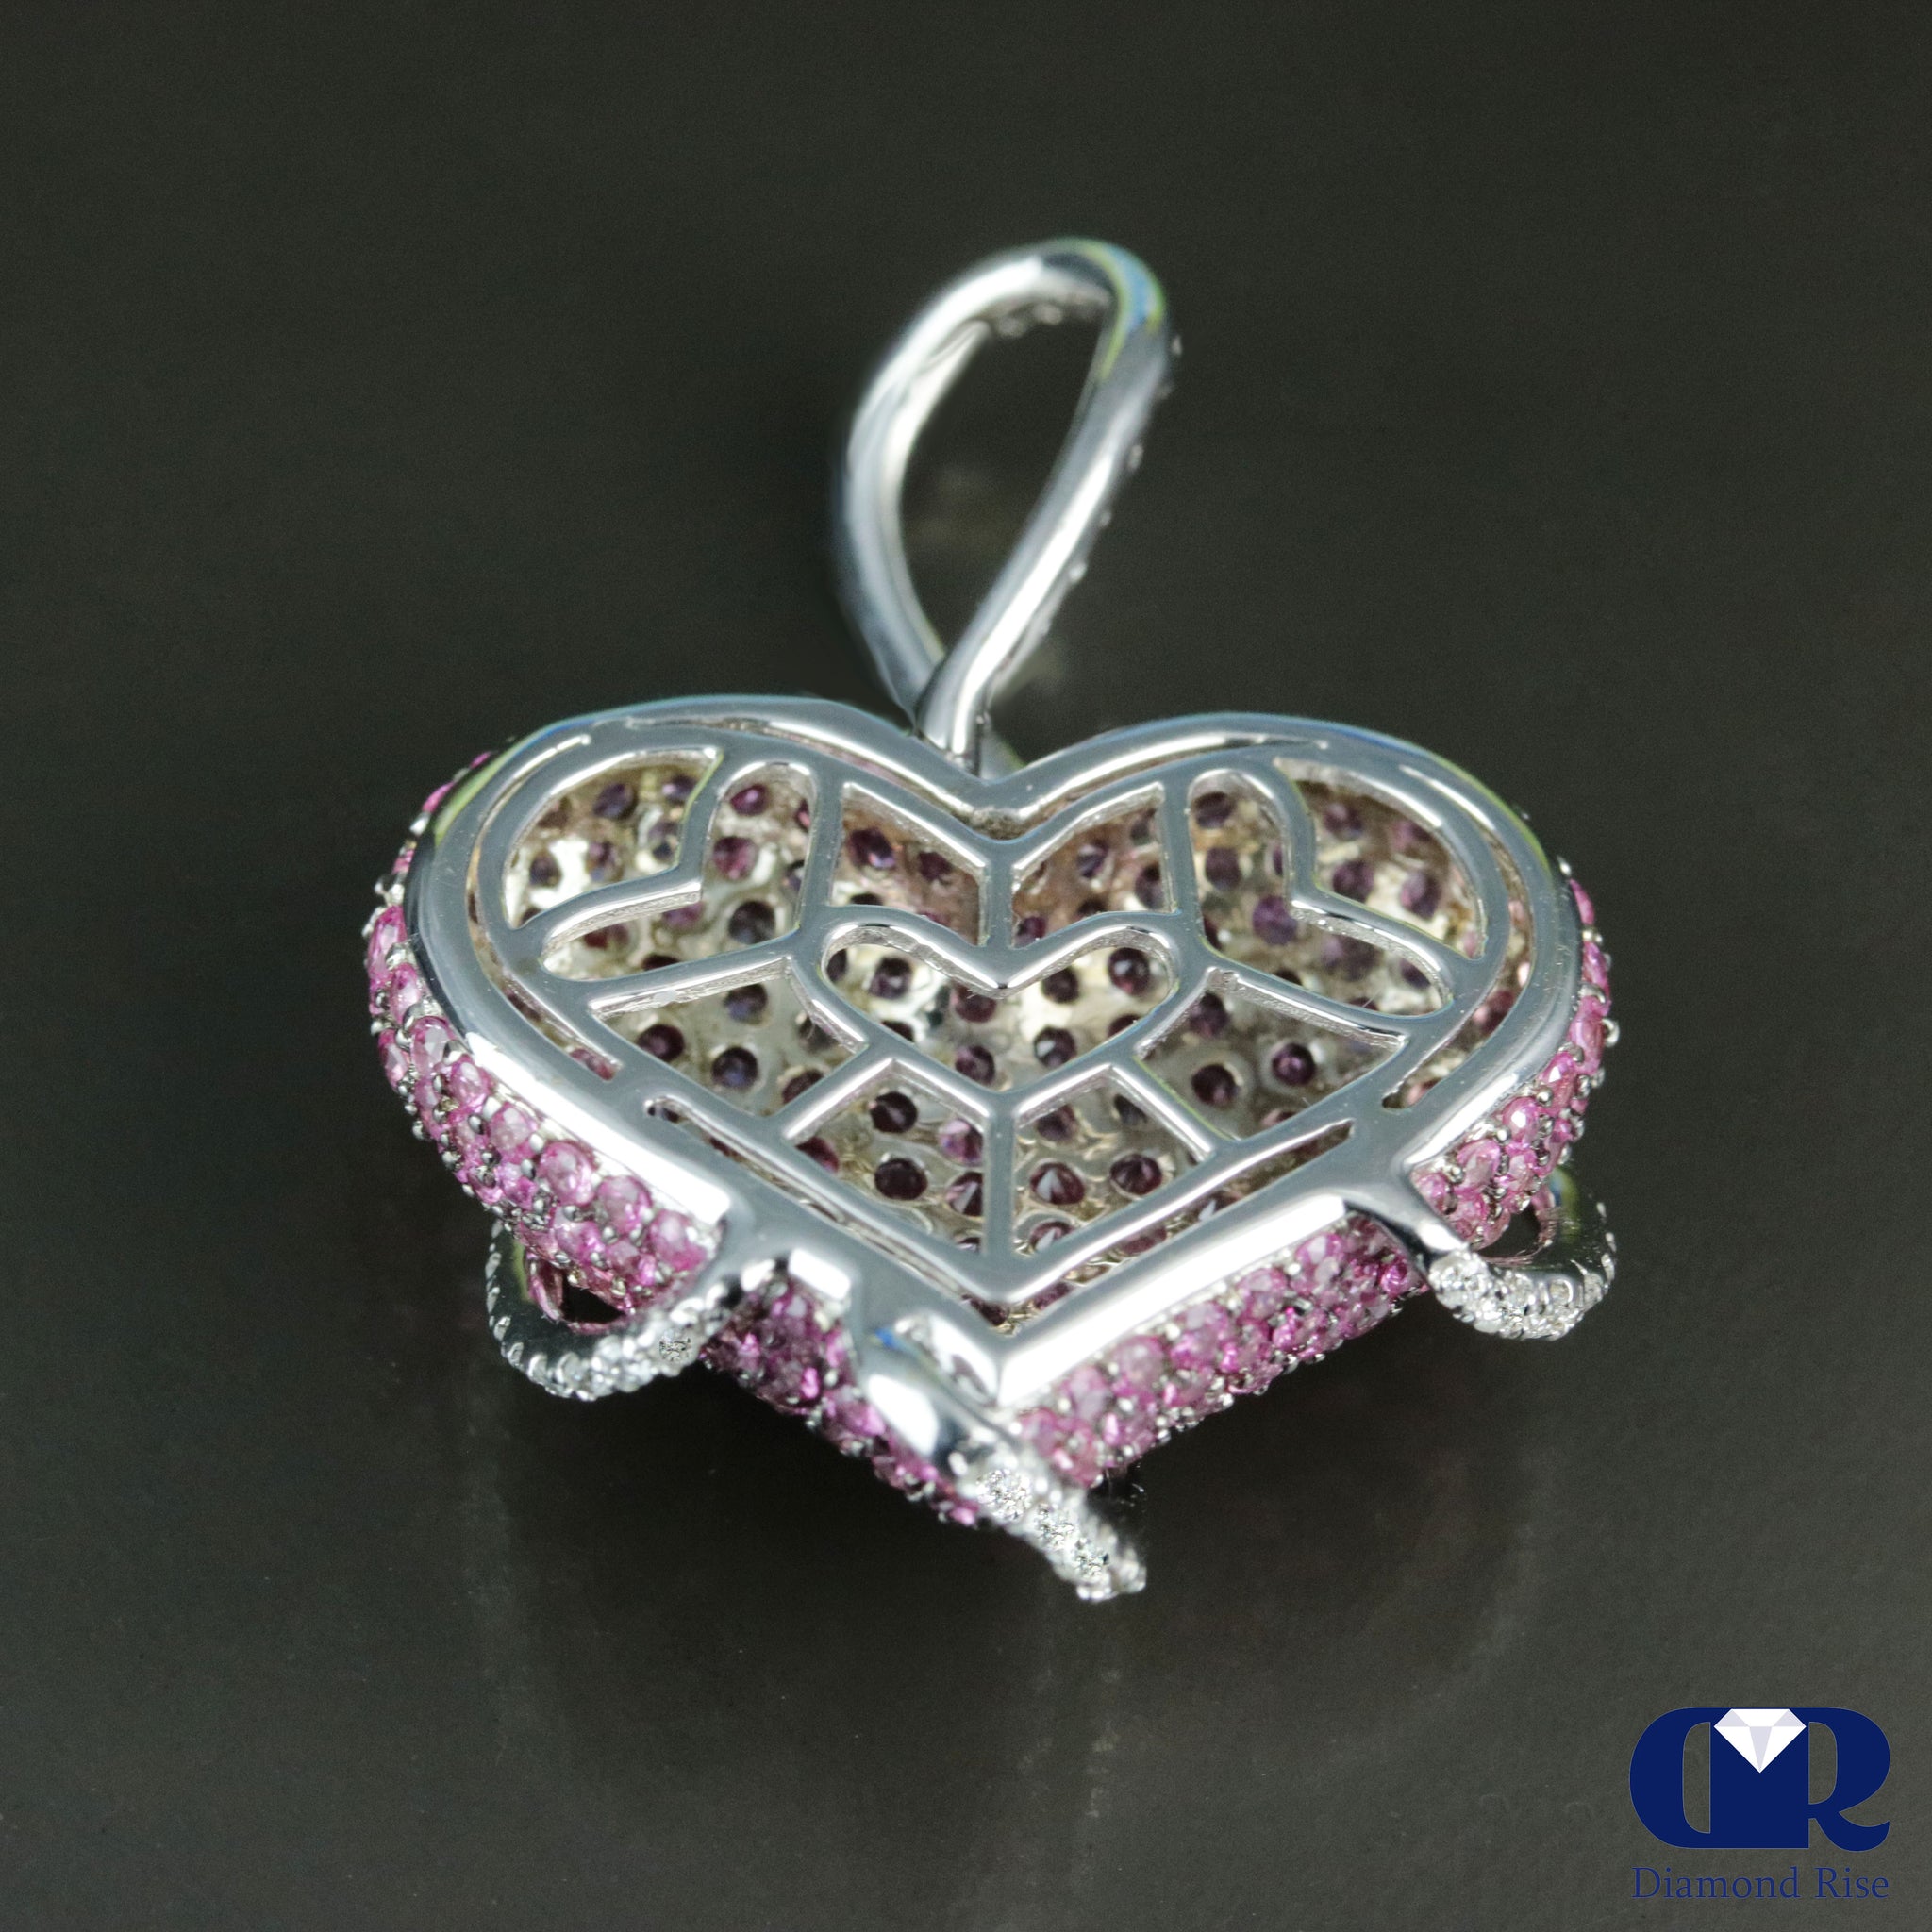 Flexible Wire Necklace with Pink Sapphire and Diamond Heart 18K Rose